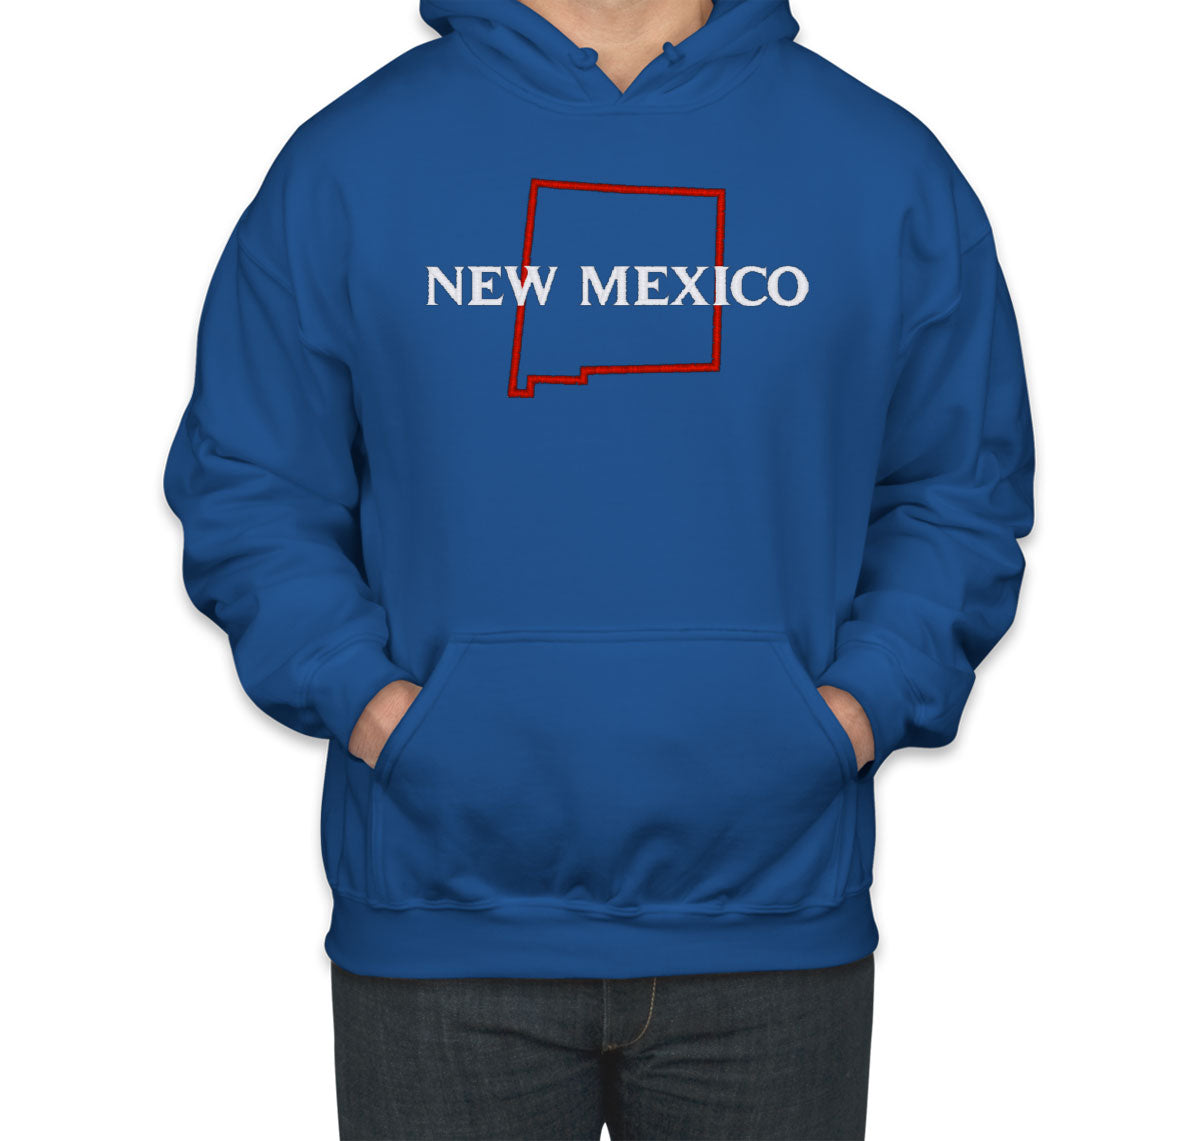 New Mexico Embroidered Unisex Hoodie